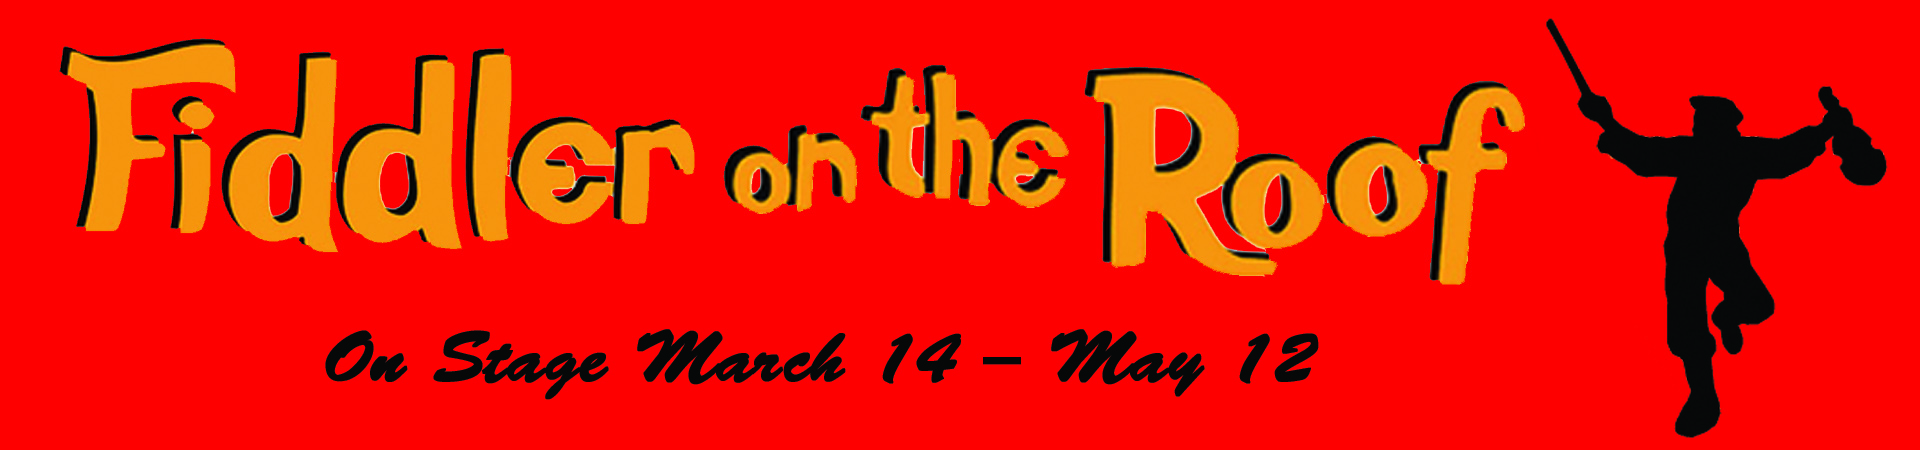 Logo for Fiddler on the Roof, March 14 through May 12